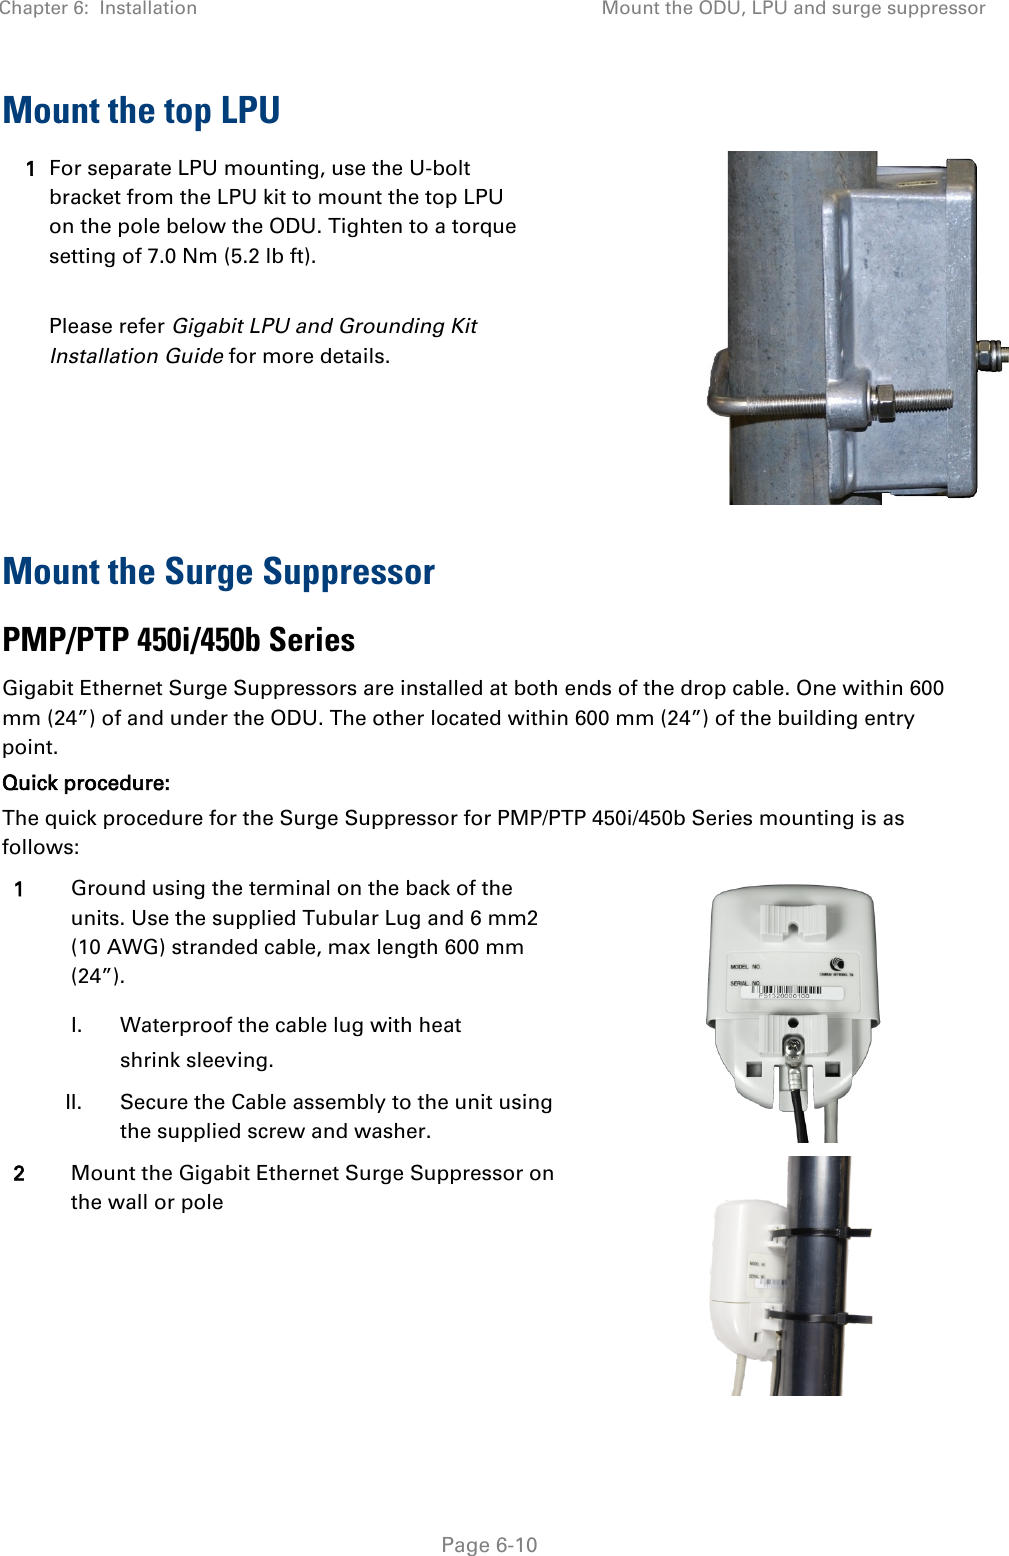 Chapter 6:  Installation Mount the ODU, LPU and surge suppressor   Page 6-10 Mount the top LPU 1 For separate LPU mounting, use the U-bolt bracket from the LPU kit to mount the top LPU on the pole below the ODU. Tighten to a torque setting of 7.0 Nm (5.2 lb ft).  Please refer Gigabit LPU and Grounding Kit Installation Guide for more details.  Mount the Surge Suppressor PMP/PTP 450i/450b Series Gigabit Ethernet Surge Suppressors are installed at both ends of the drop cable. One within 600 mm (24”) of and under the ODU. The other located within 600 mm (24”) of the building entry point.  Quick procedure: The quick procedure for the Surge Suppressor for PMP/PTP 450i/450b Series mounting is as follows: 1 Ground using the terminal on the back of the units. Use the supplied Tubular Lug and 6 mm2 (10 AWG) stranded cable, max length 600 mm (24”).   I. Waterproof the cable lug with heat shrink sleeving.  II. Secure the Cable assembly to the unit using the supplied screw and washer. 2 Mount the Gigabit Ethernet Surge Suppressor on the wall or pole  